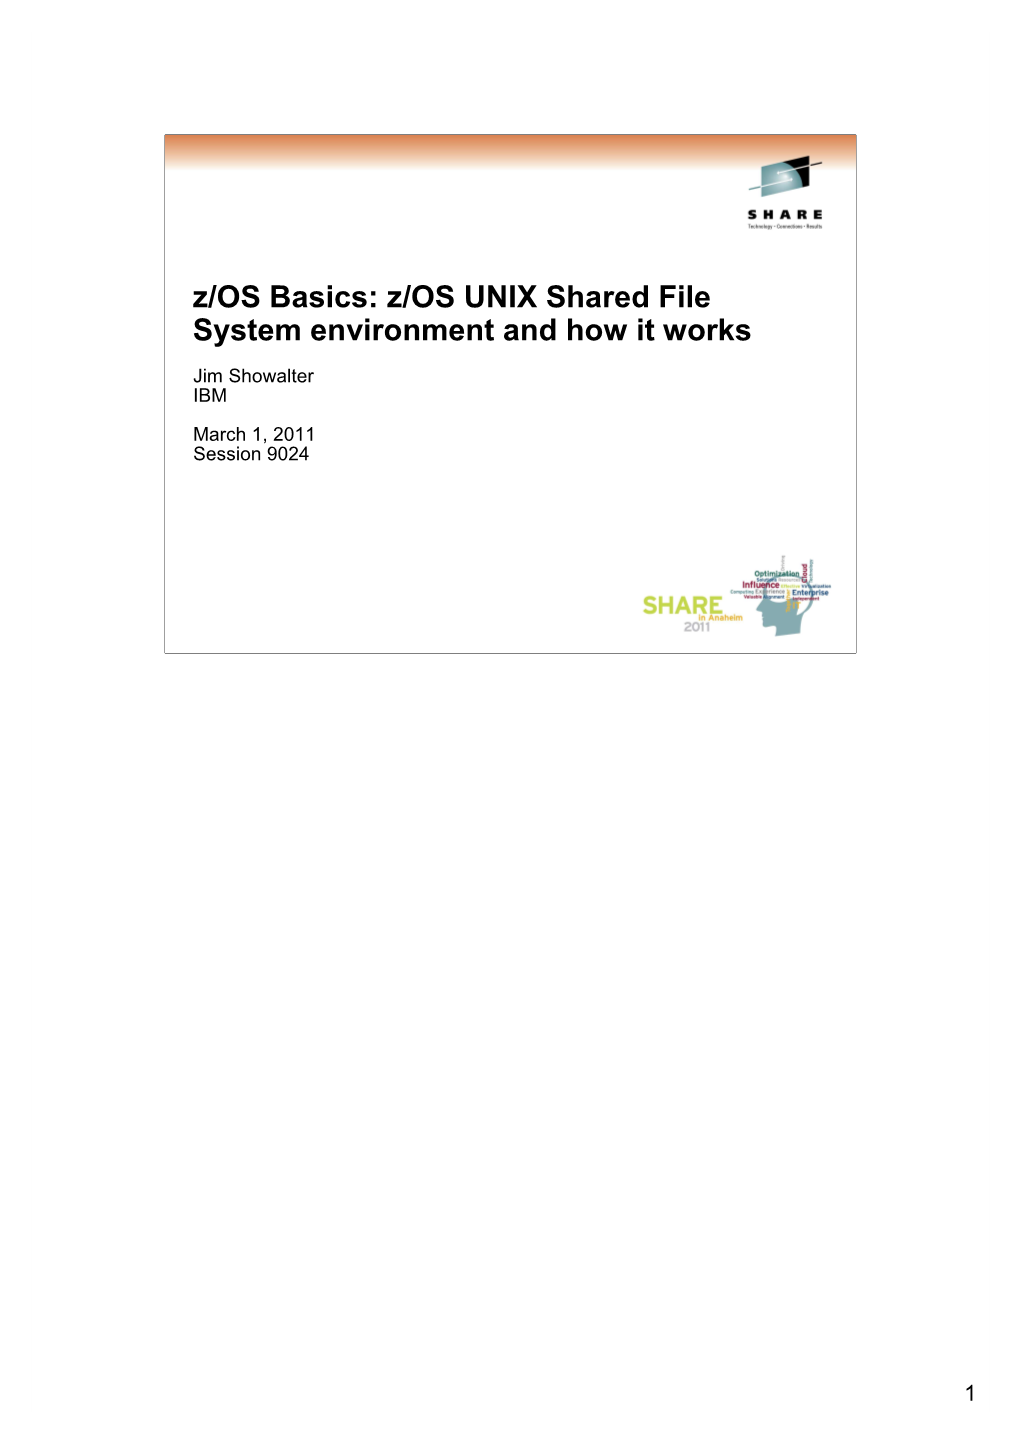 Z/OS UNIX Shared File System Environment and How It Works